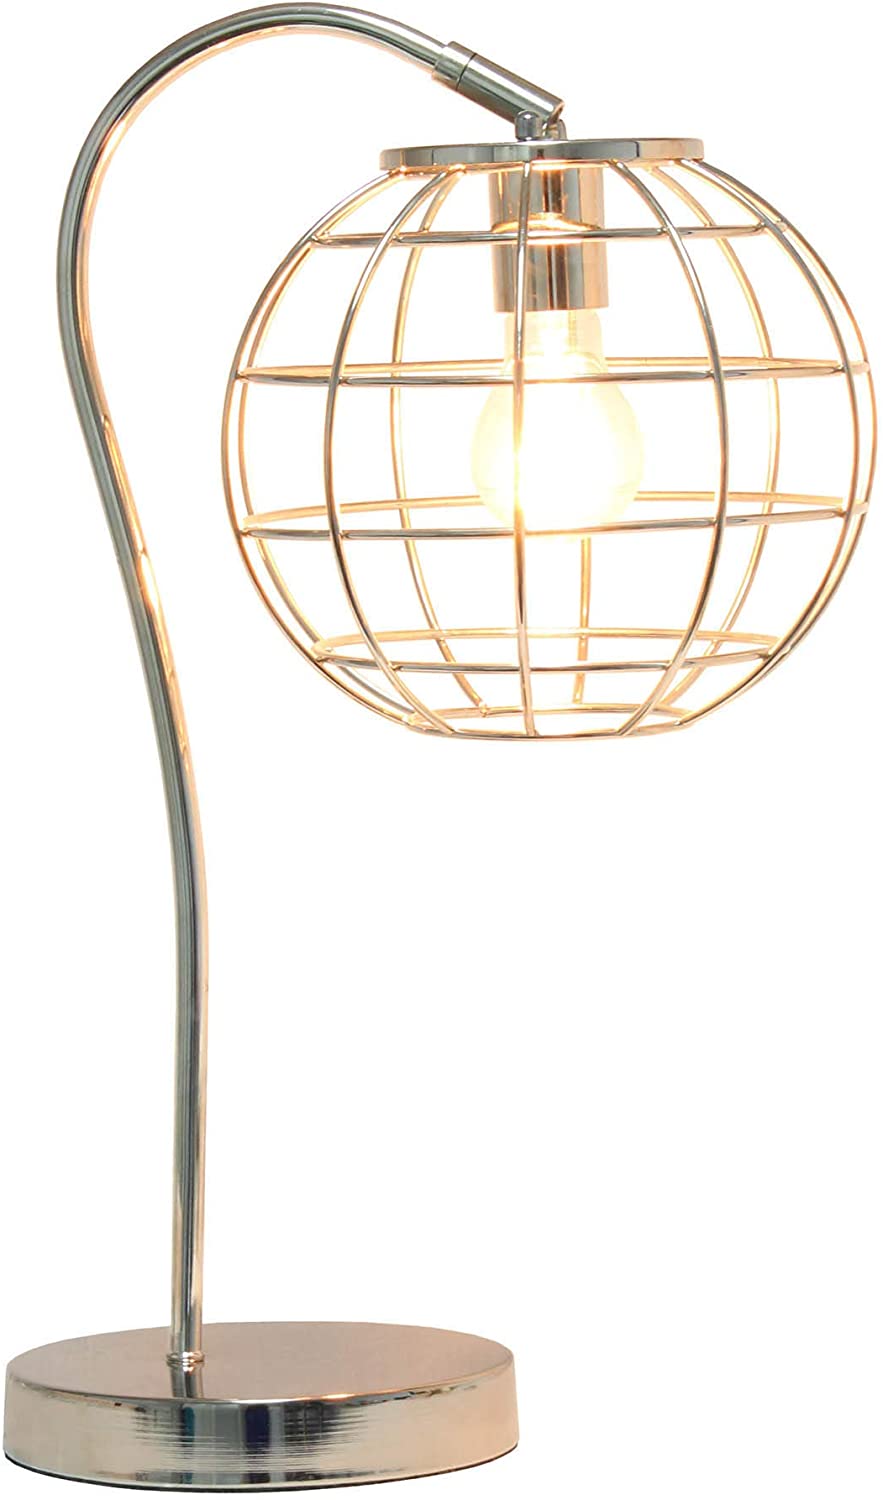 Lalia Home Decorative Arched Metal Cage Table Lamp, Chrome